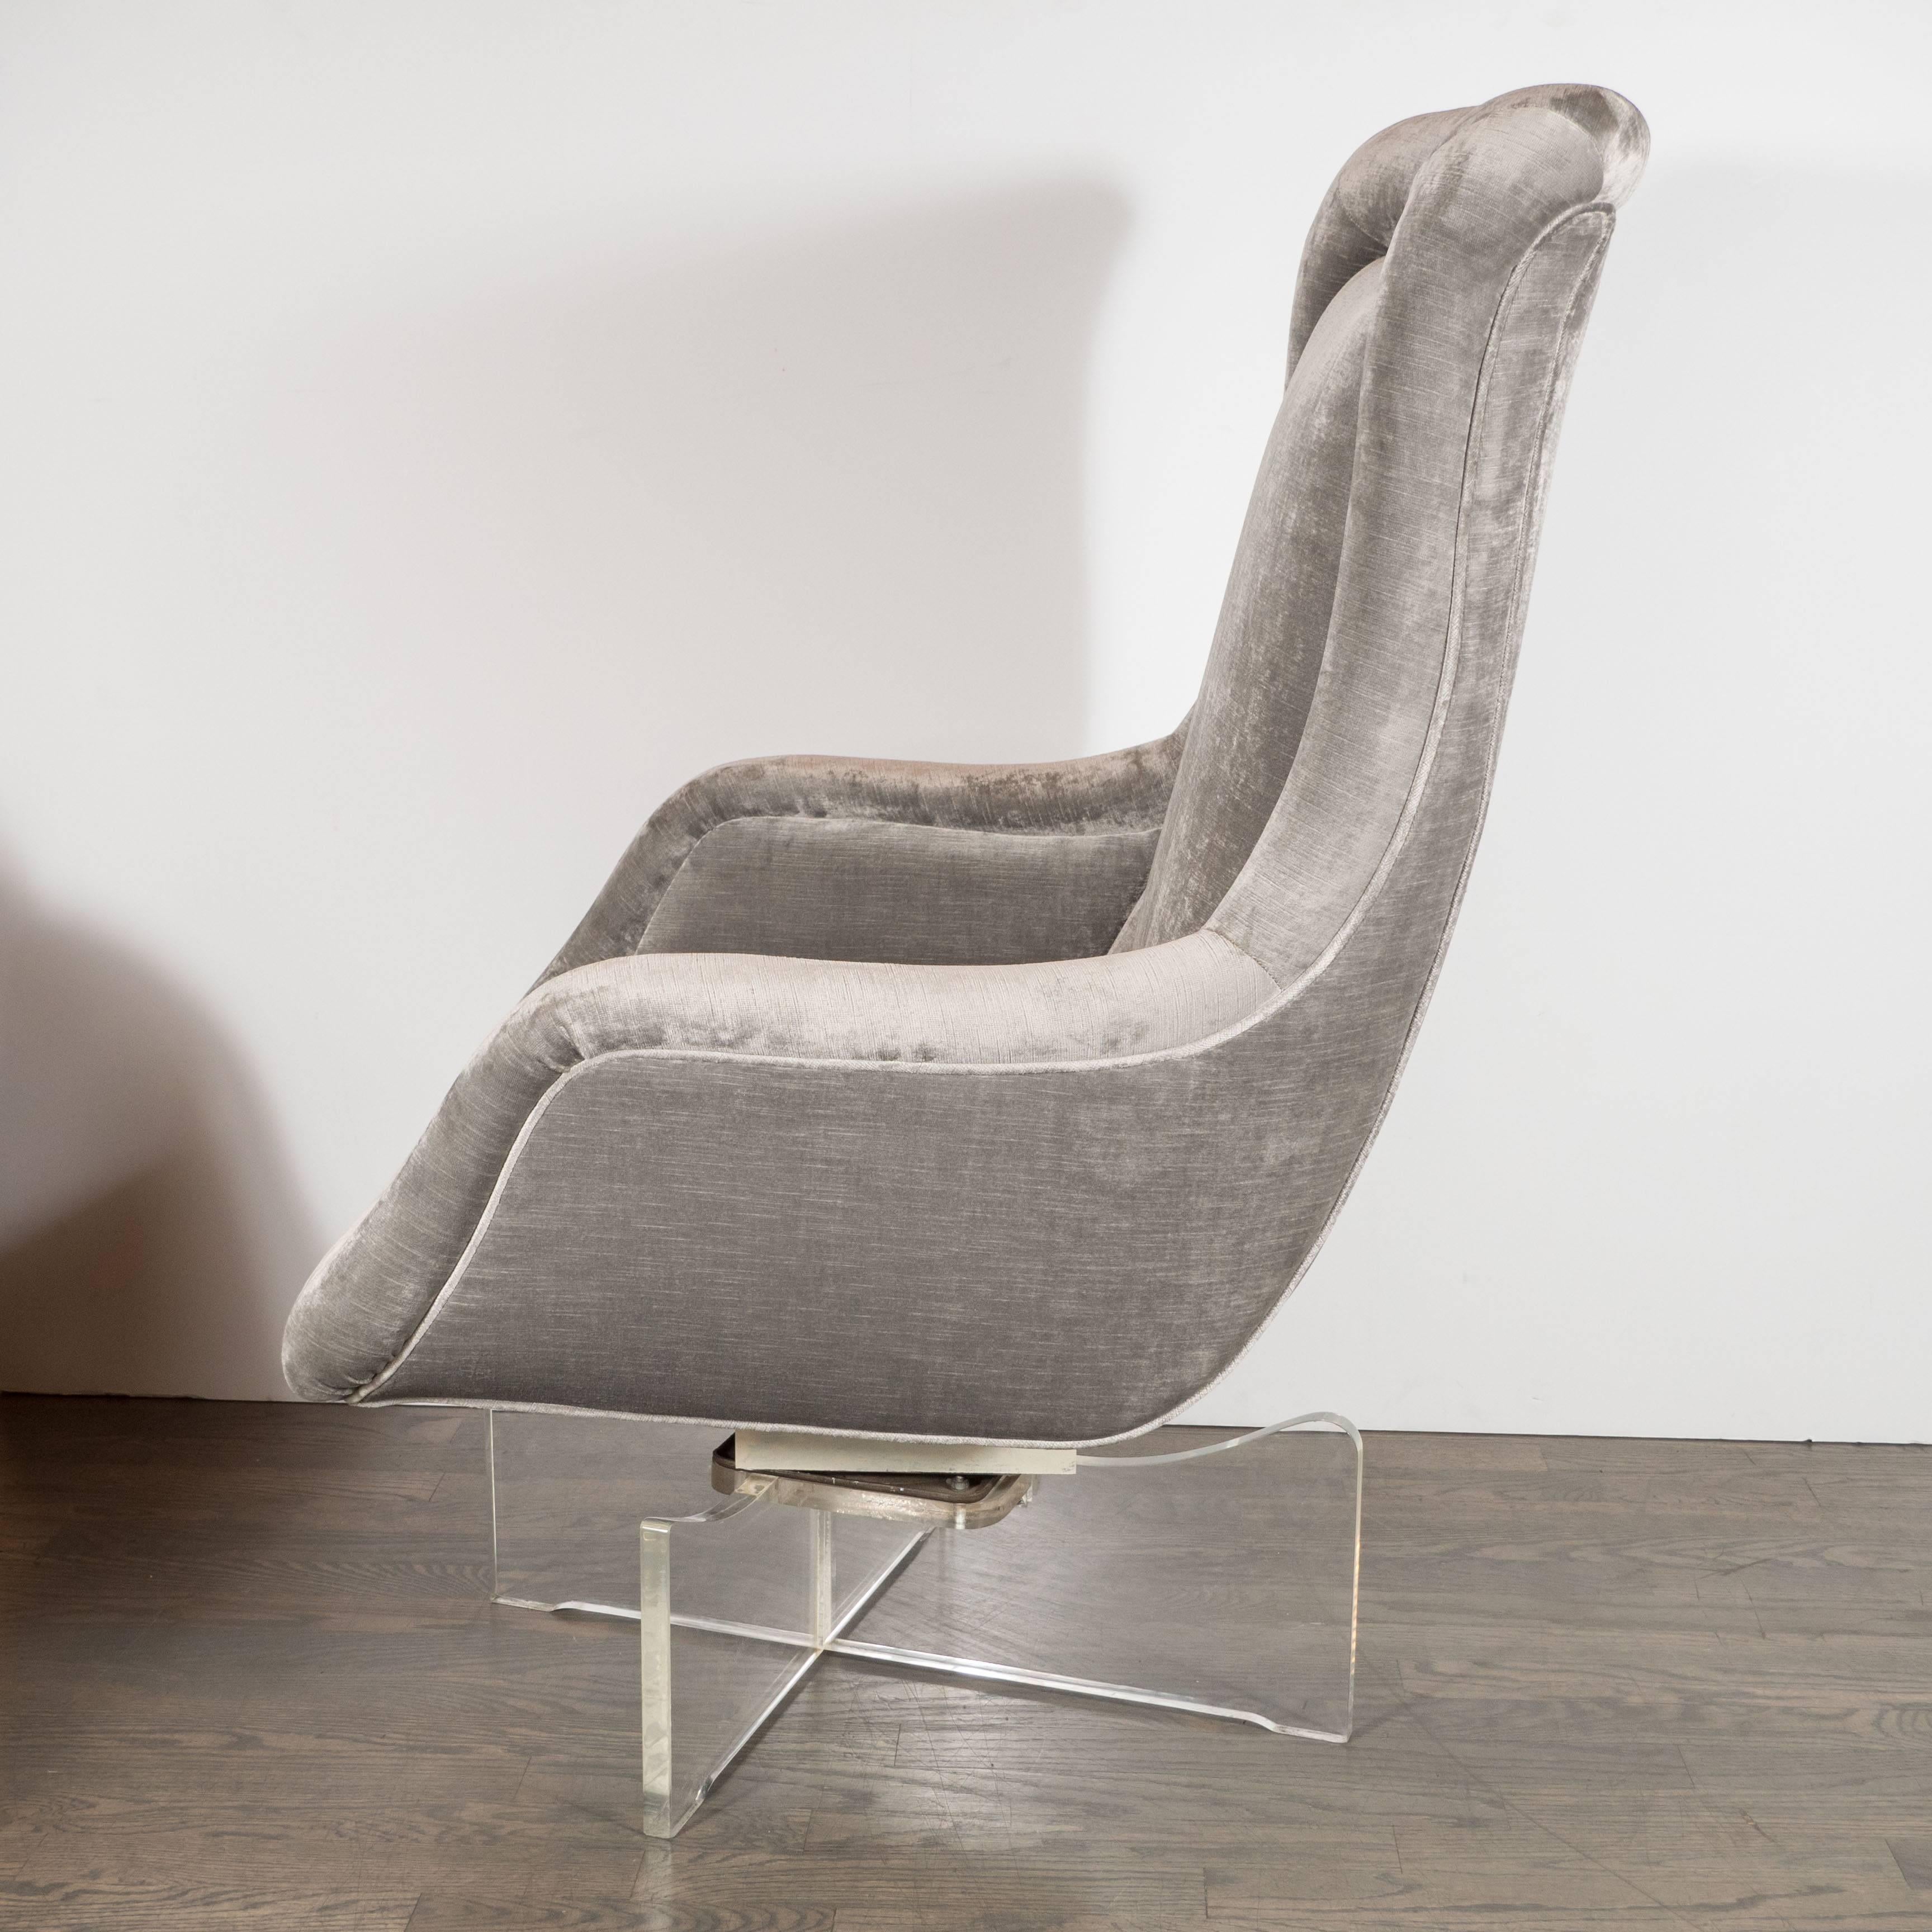 Mid-Century Modernist floating swivel chair on a clear Lucite base in the manner of Vladimir Kagan. A criss-cross Lucite base and swivel mechanism support a fully upholstered high-back chair. Minimal detailing and a curved, 1970s egg-style form with